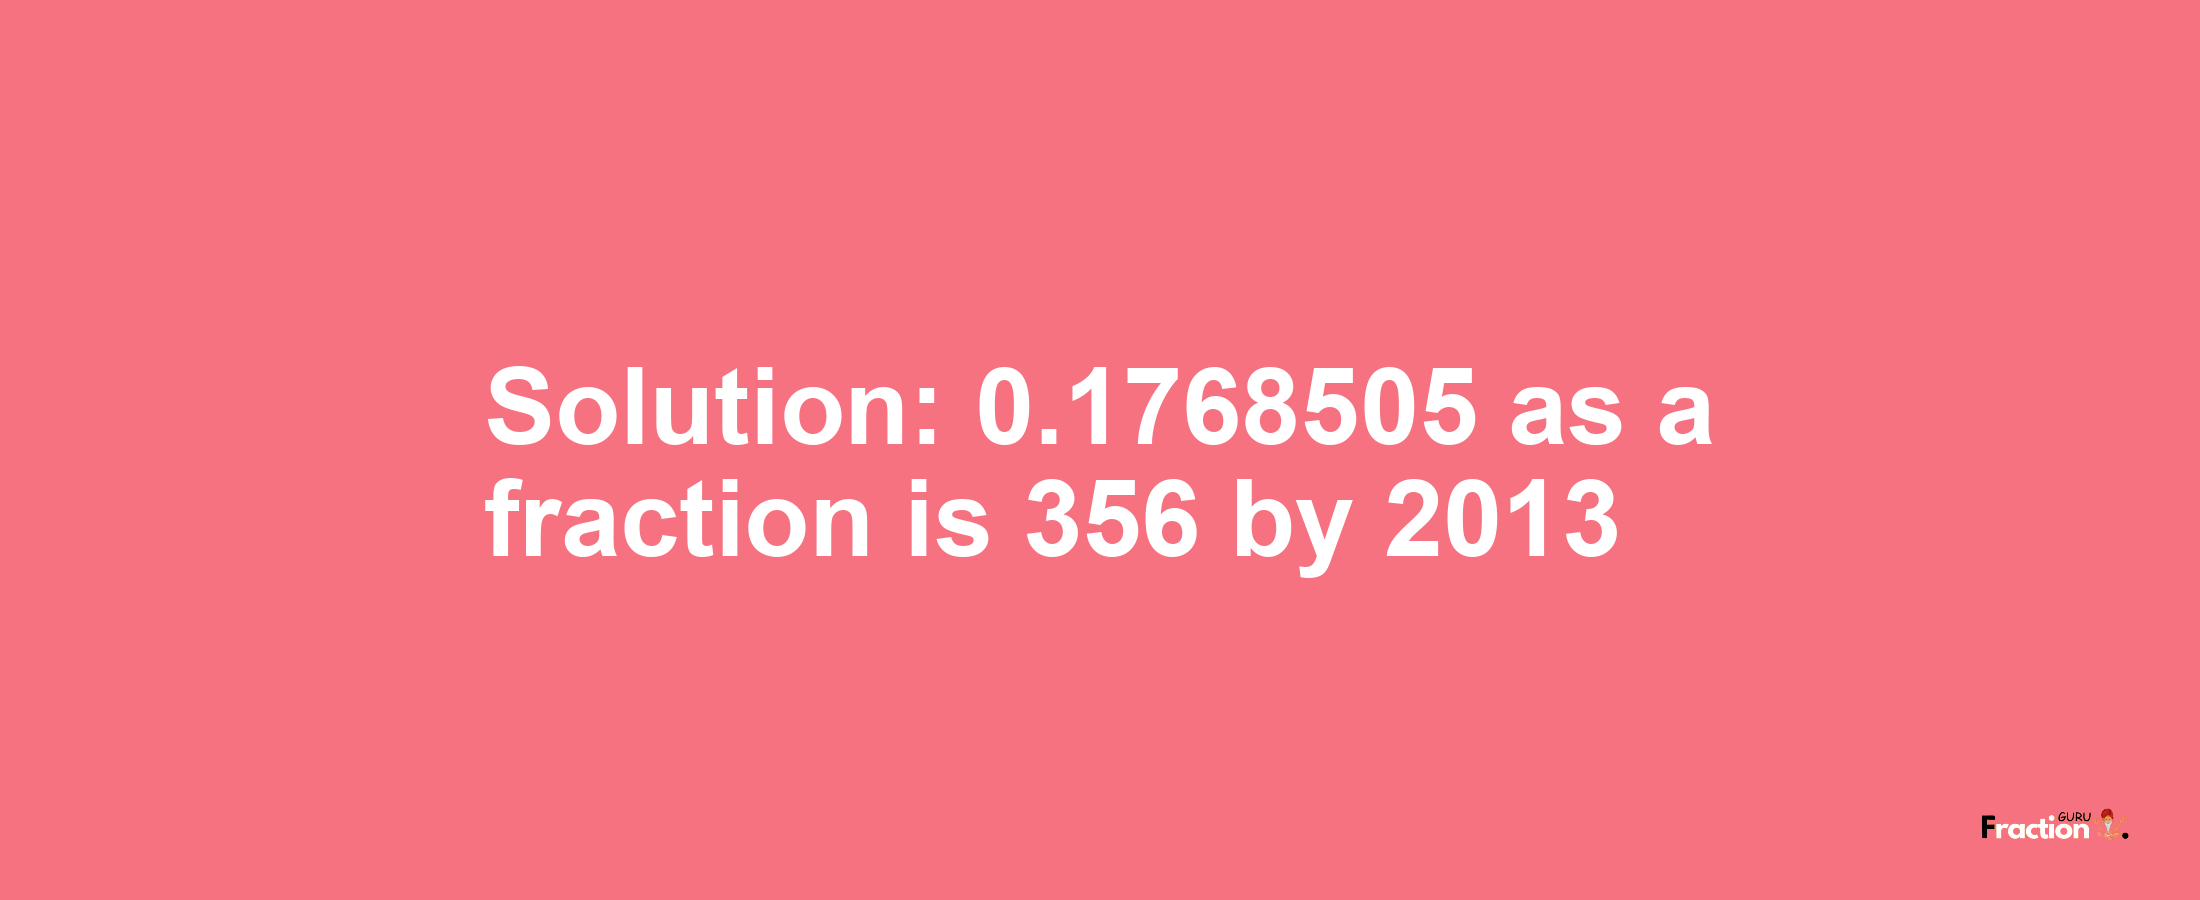 Solution:0.1768505 as a fraction is 356/2013